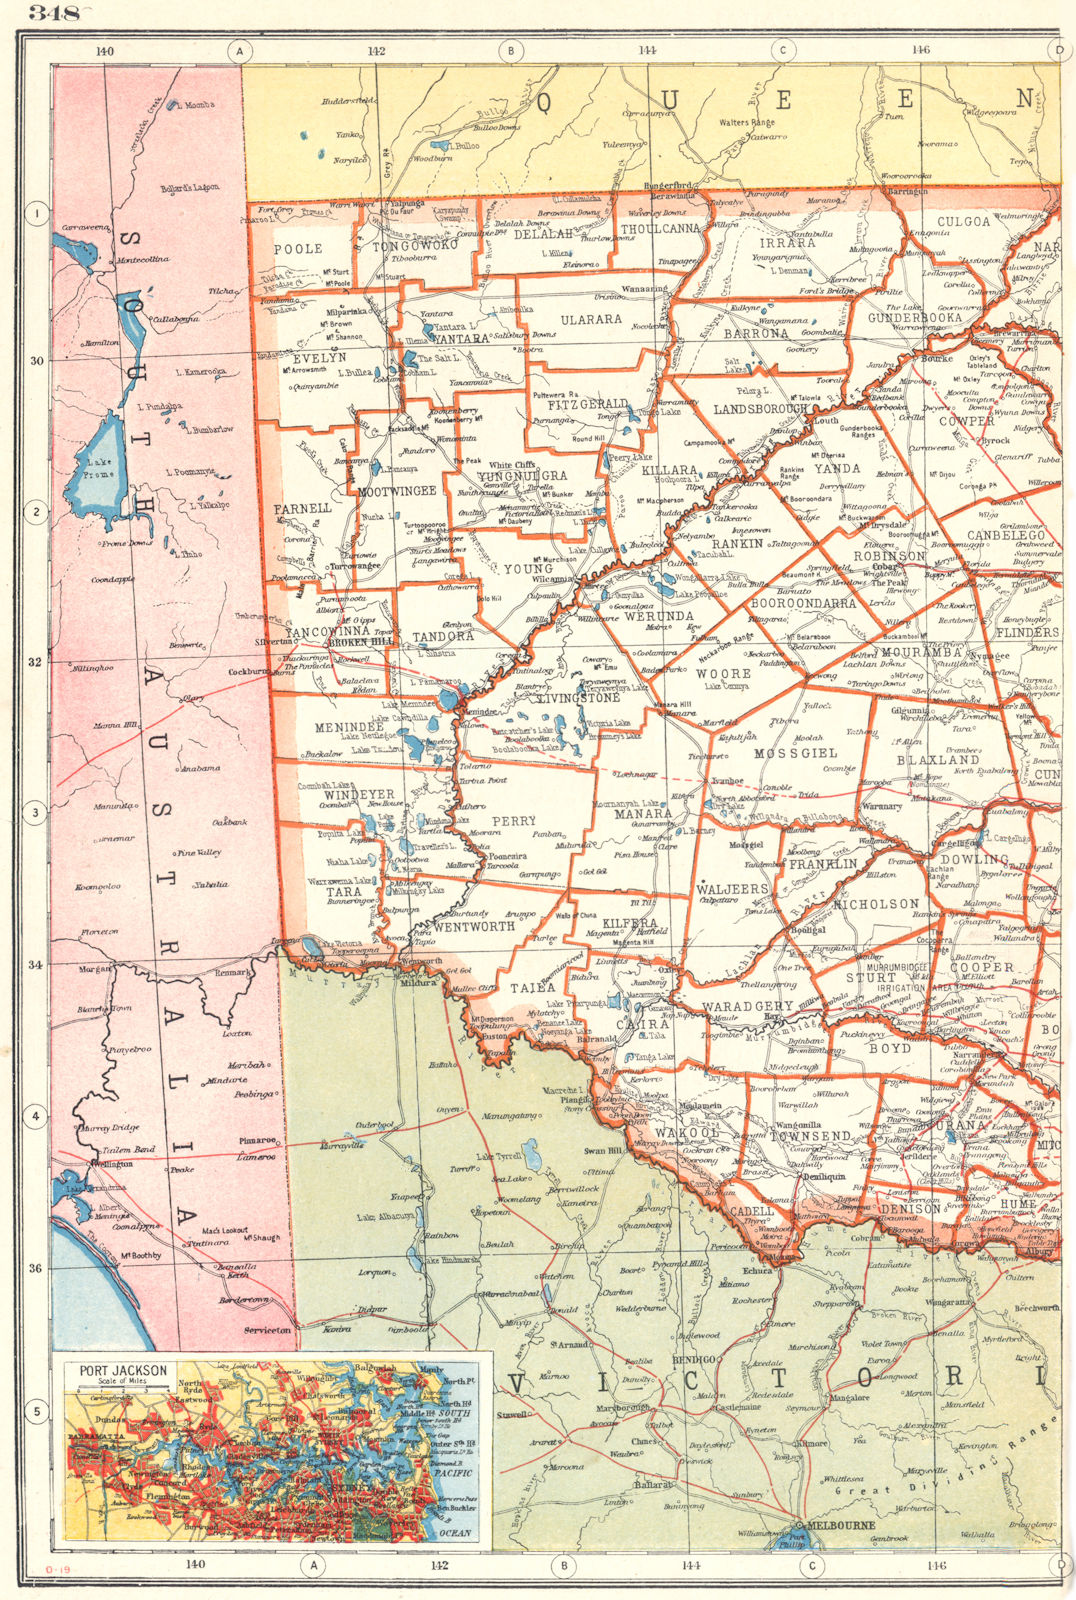 NEW SOUTH WALES WEST. Counties. Railways. Inset Sydney. Australia 1920 old map